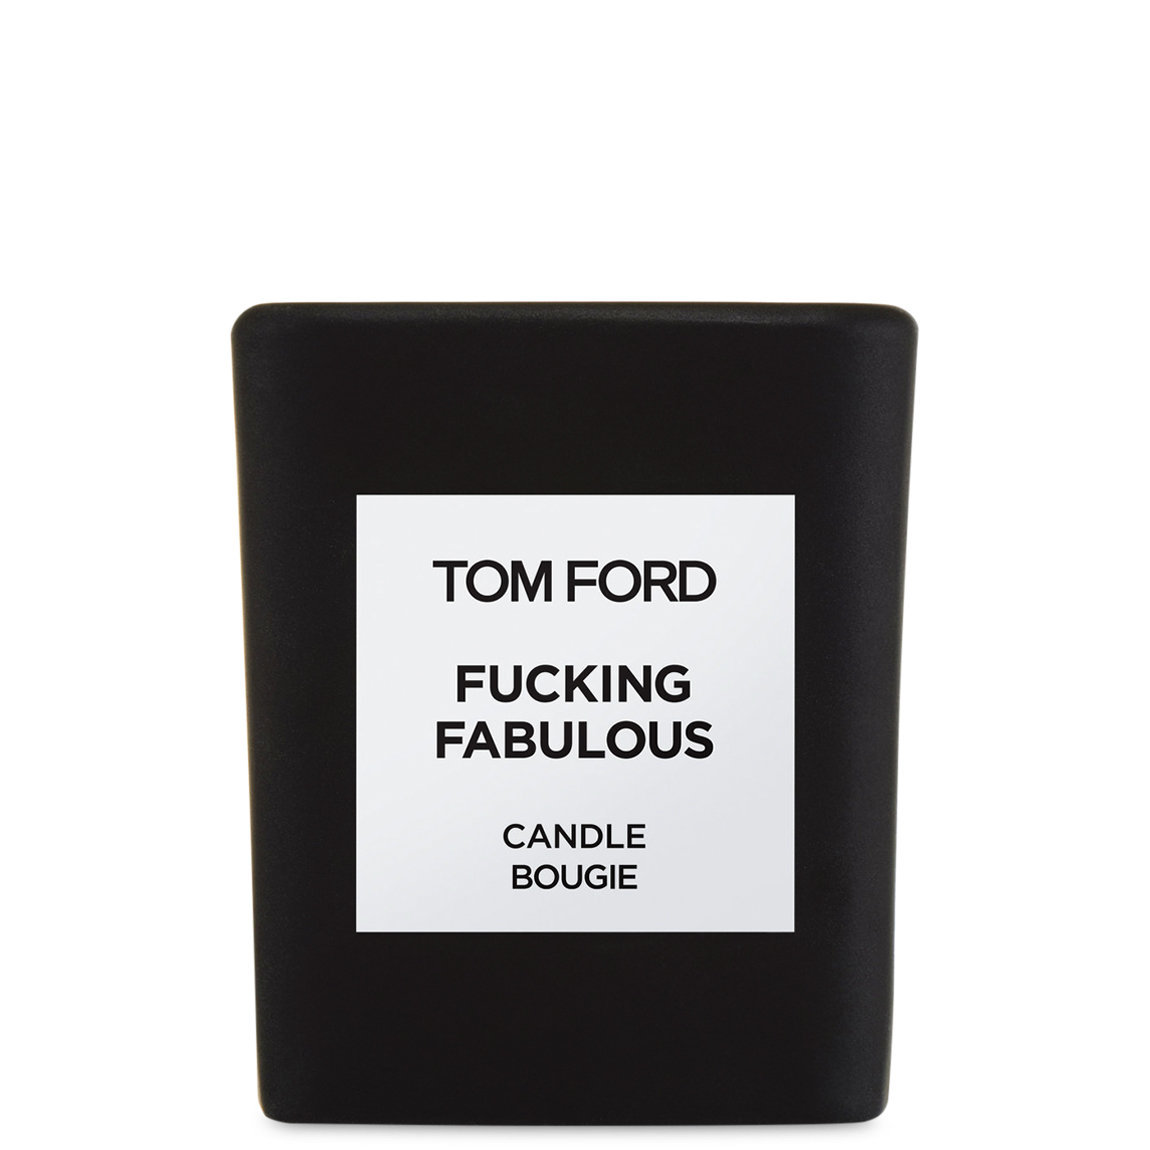 TOM FORD Fucking Fabulous Candle alternative view 1 - product swatch.